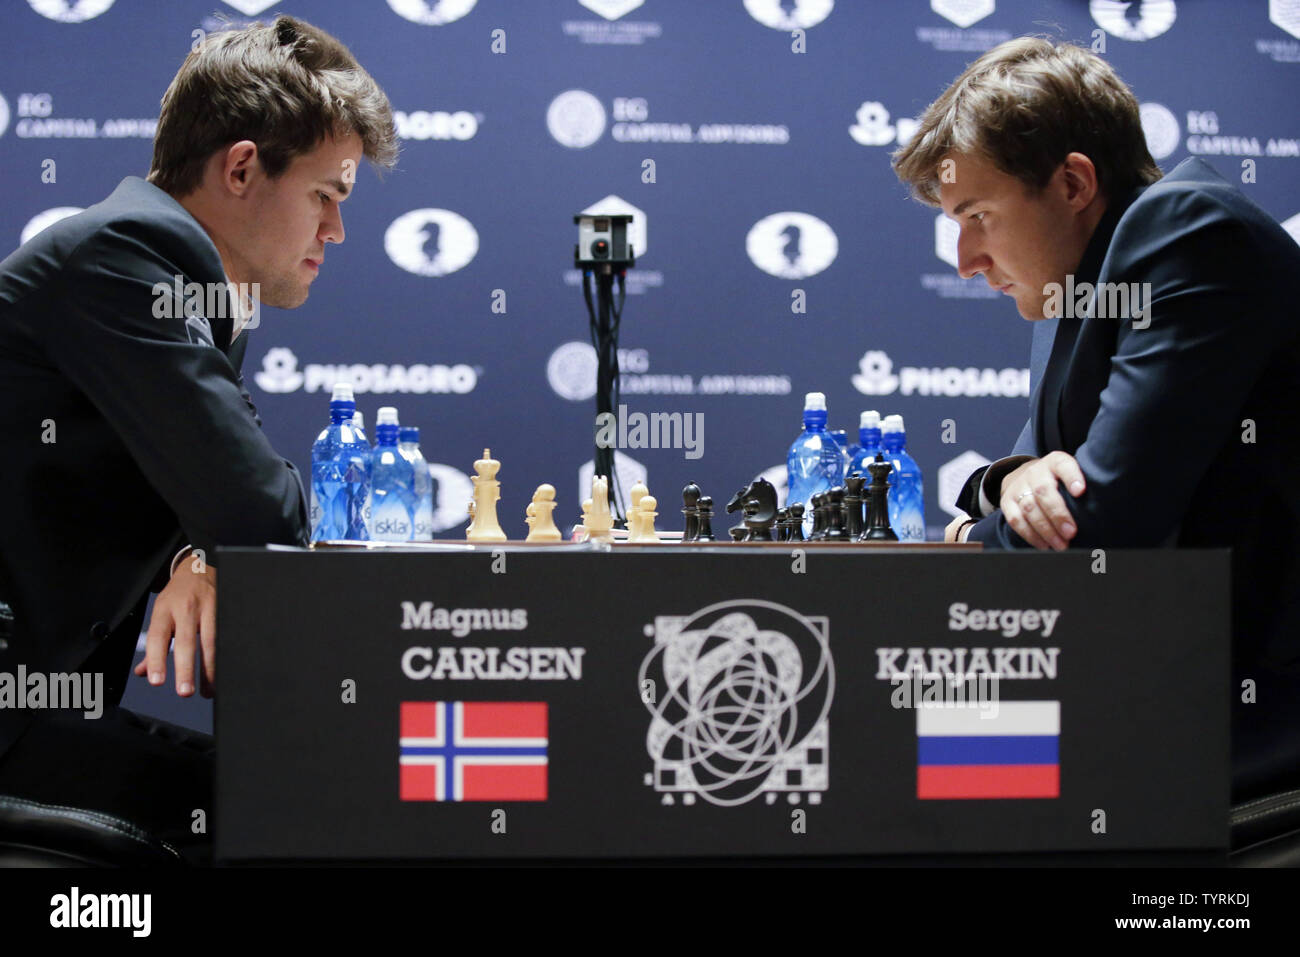 Sergey Karjakin High Resolution Stock Photography and Images - Alamy